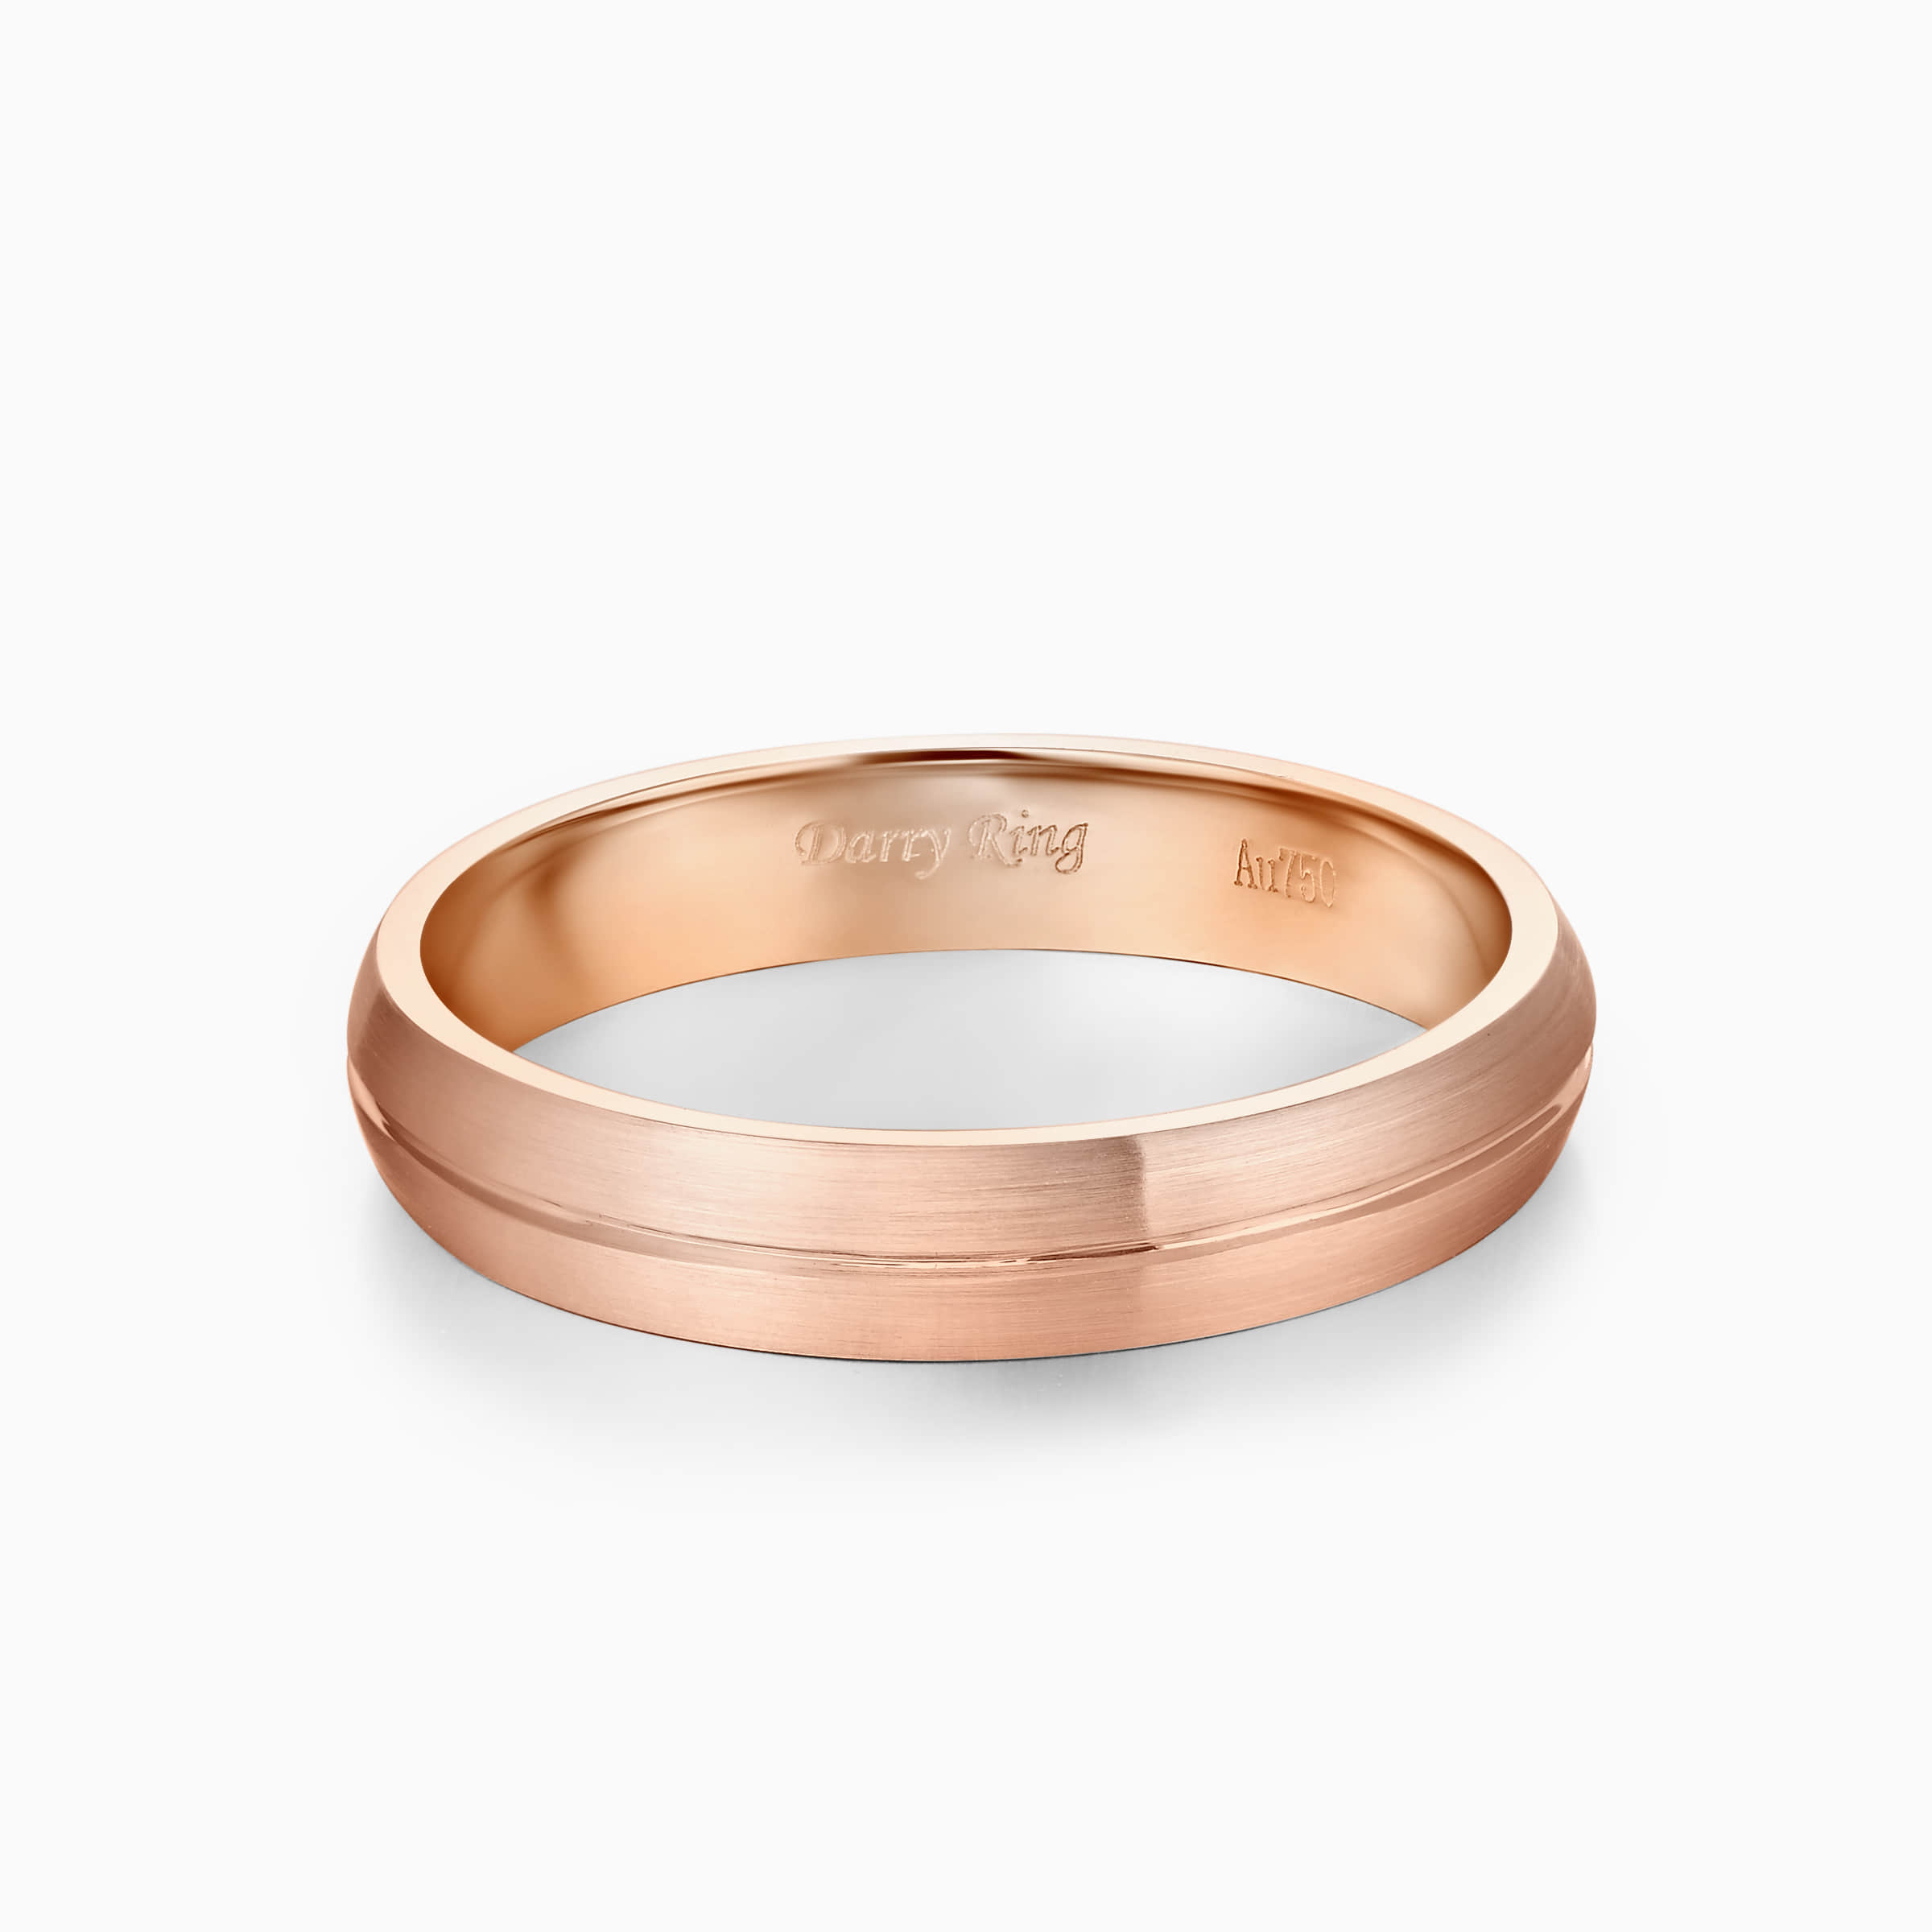 Darry Ring male wedding band in rose gold